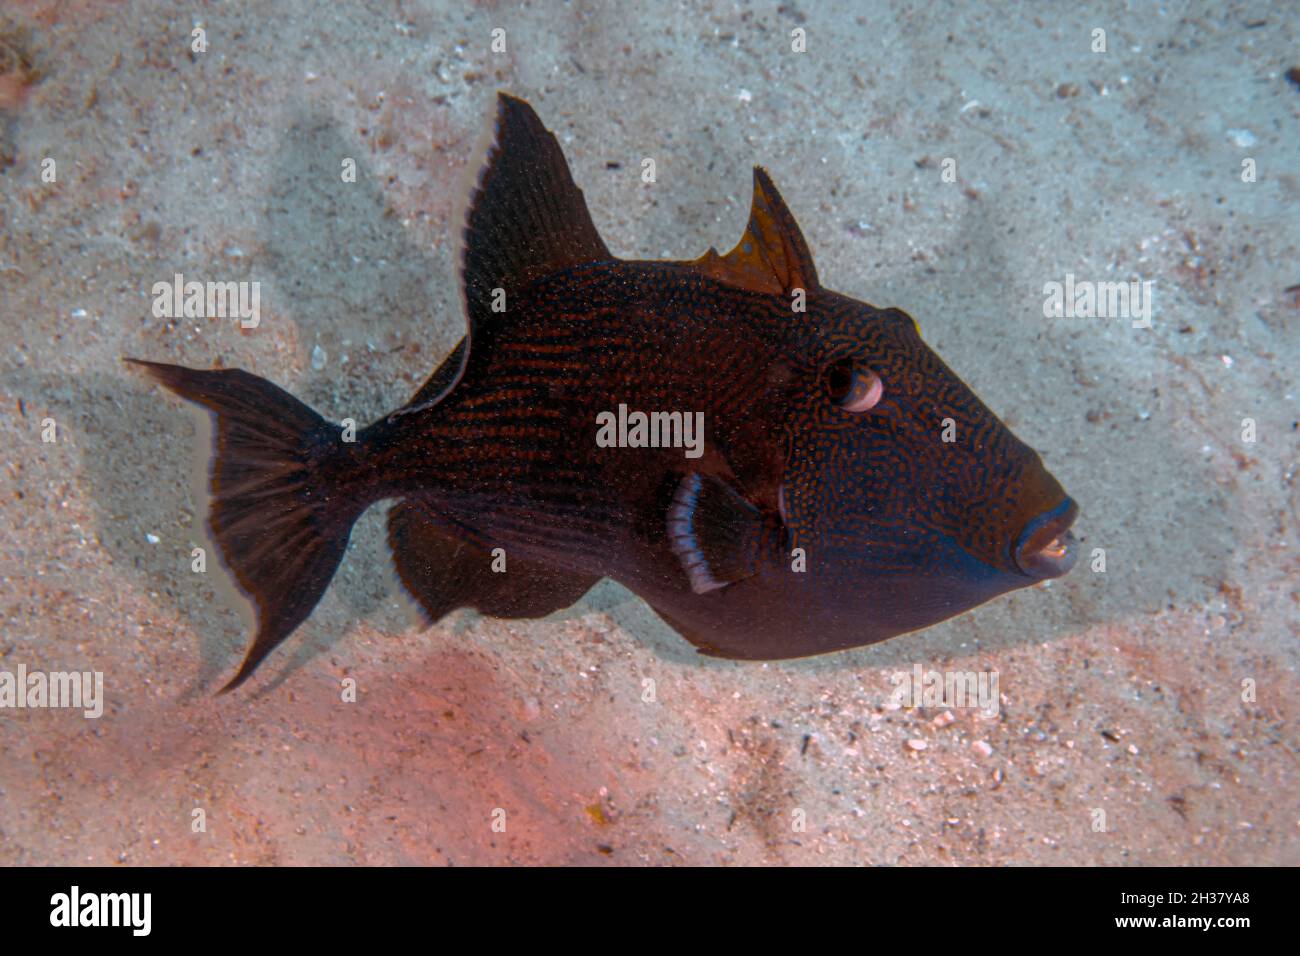 A Blue Triggerfish (Pseudobalistes fuscus) in the Red Sea, Egypt Stock Photo